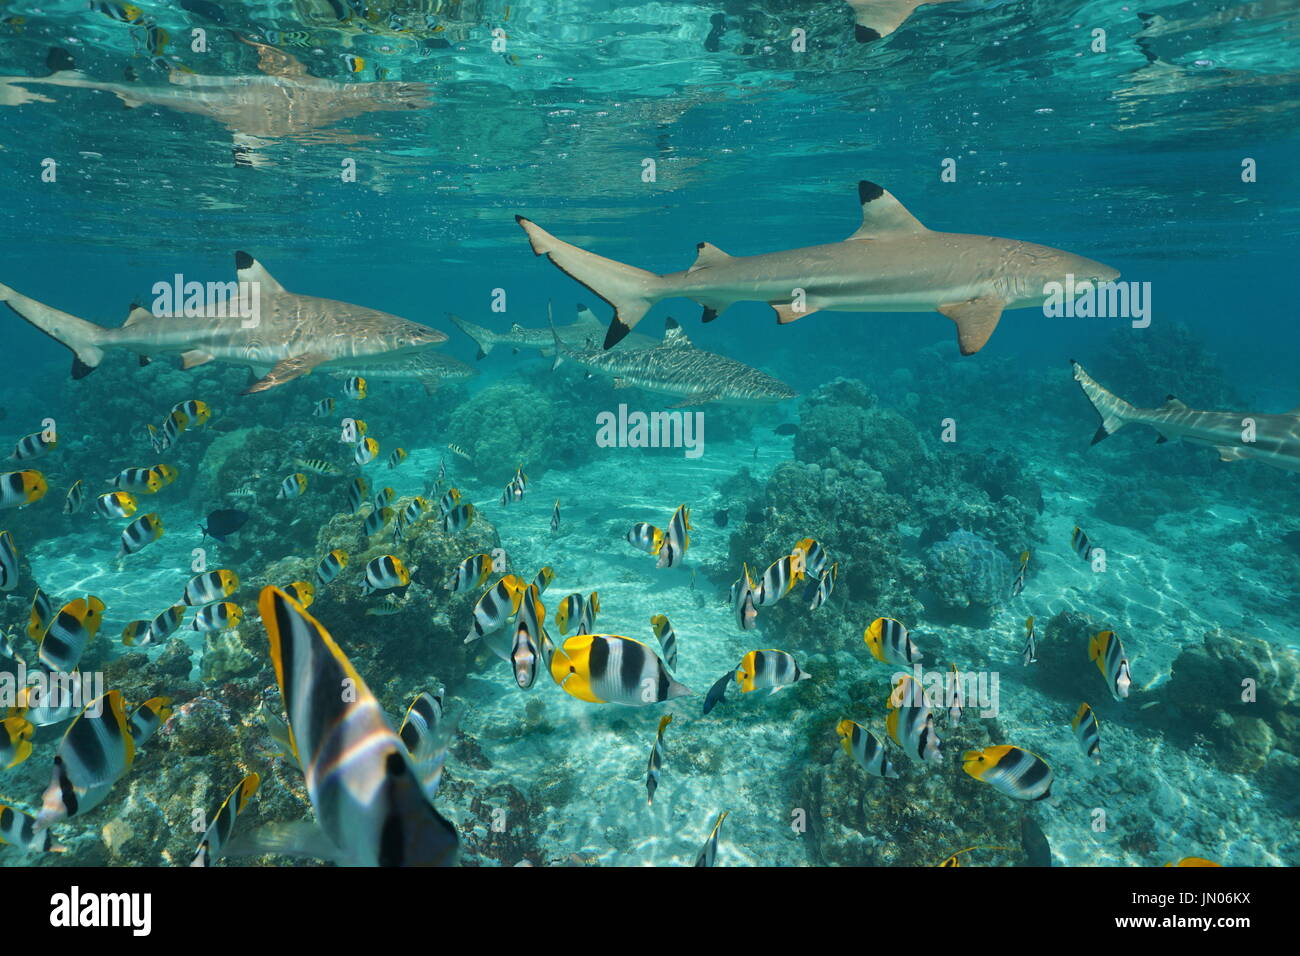 Blacktip reef sharks with a shoal of tropical fish Pacific double-saddle butterflyfish underwater in a lagoon, south Pacific ocean, French Polynesia Stock Photo